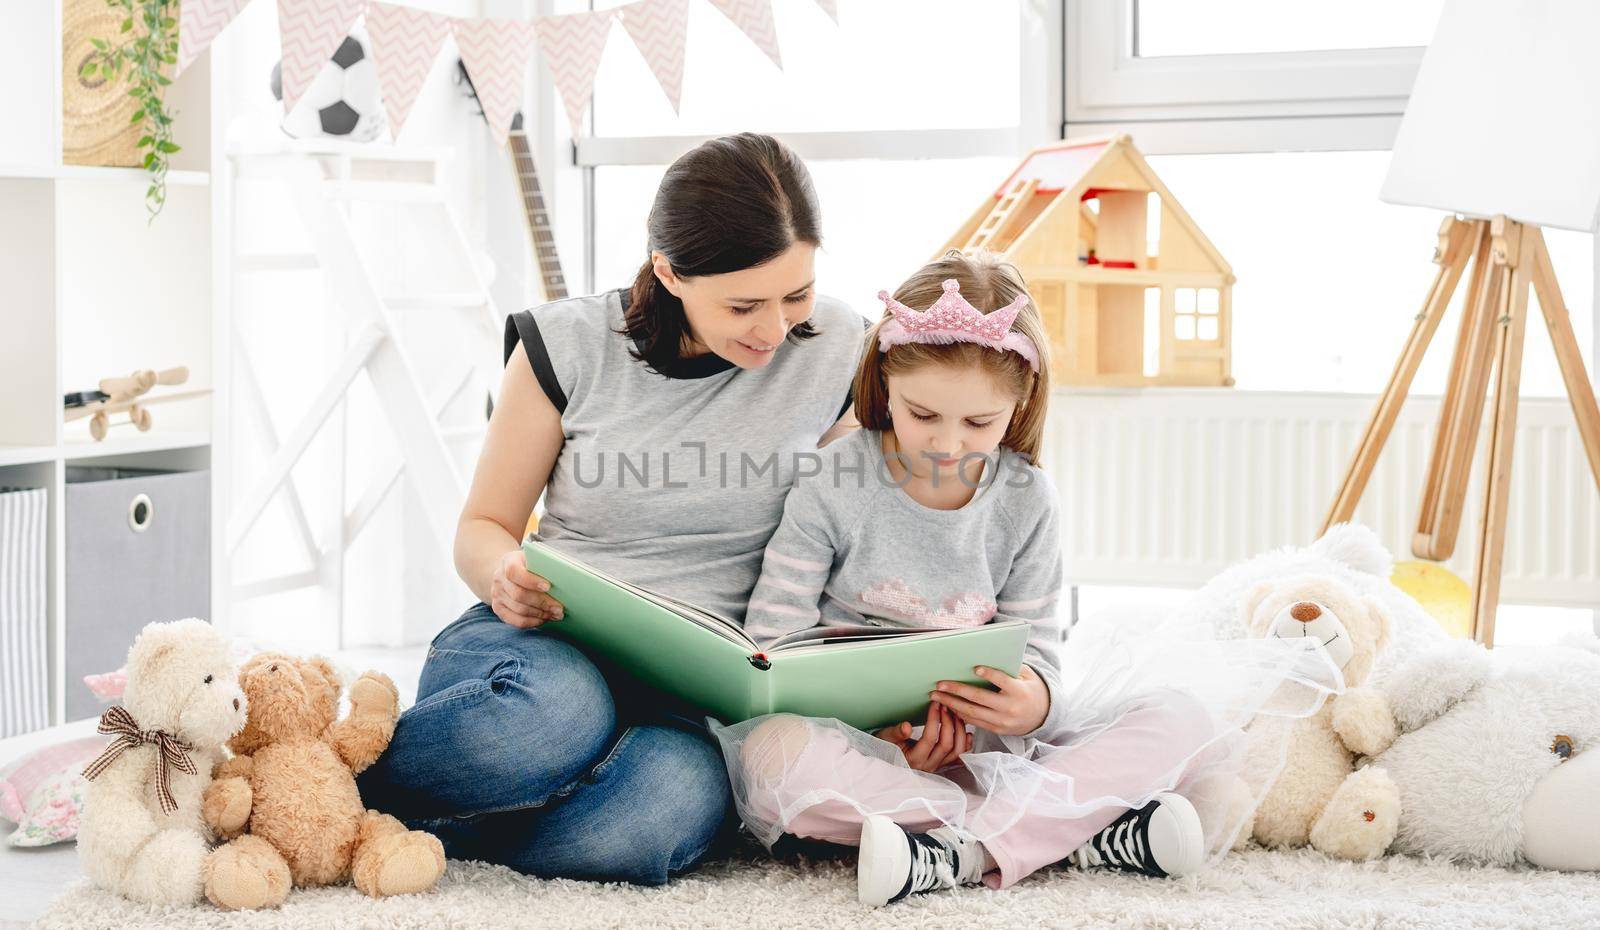 Lovely woman showing photo album to little girl in beautiful children's room